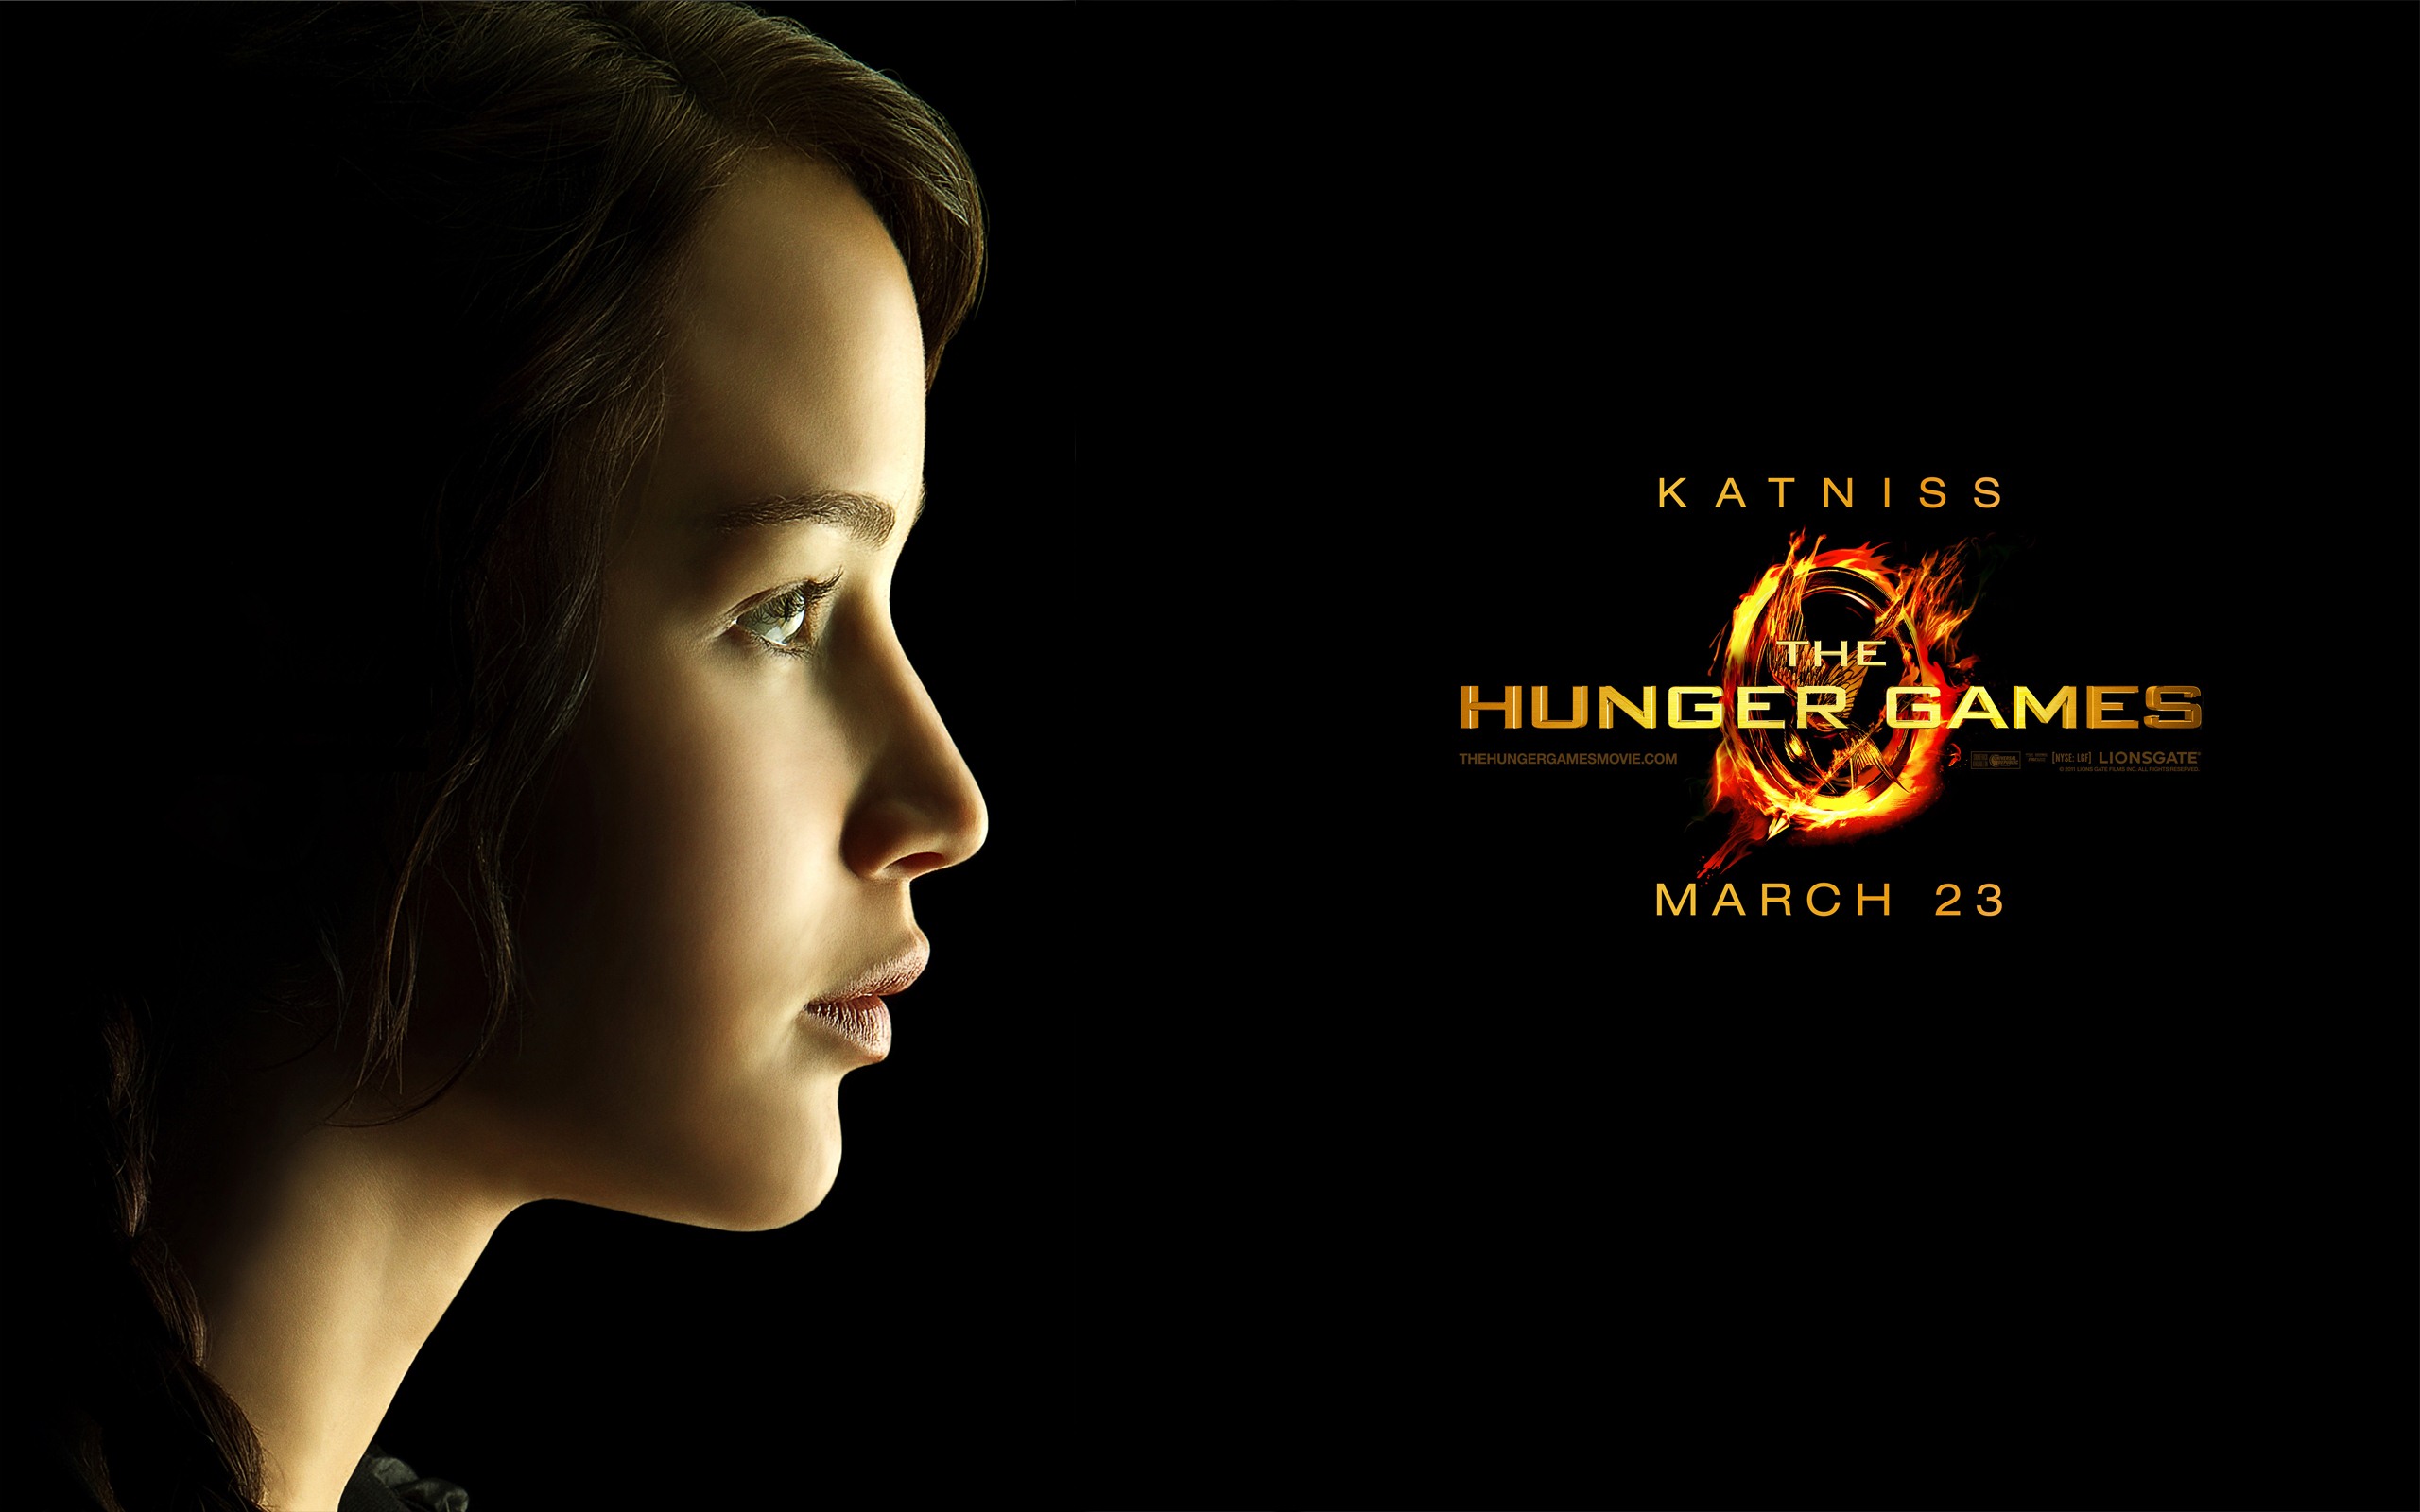 The Hunger Games HD wallpapers #14 - 2560x1600